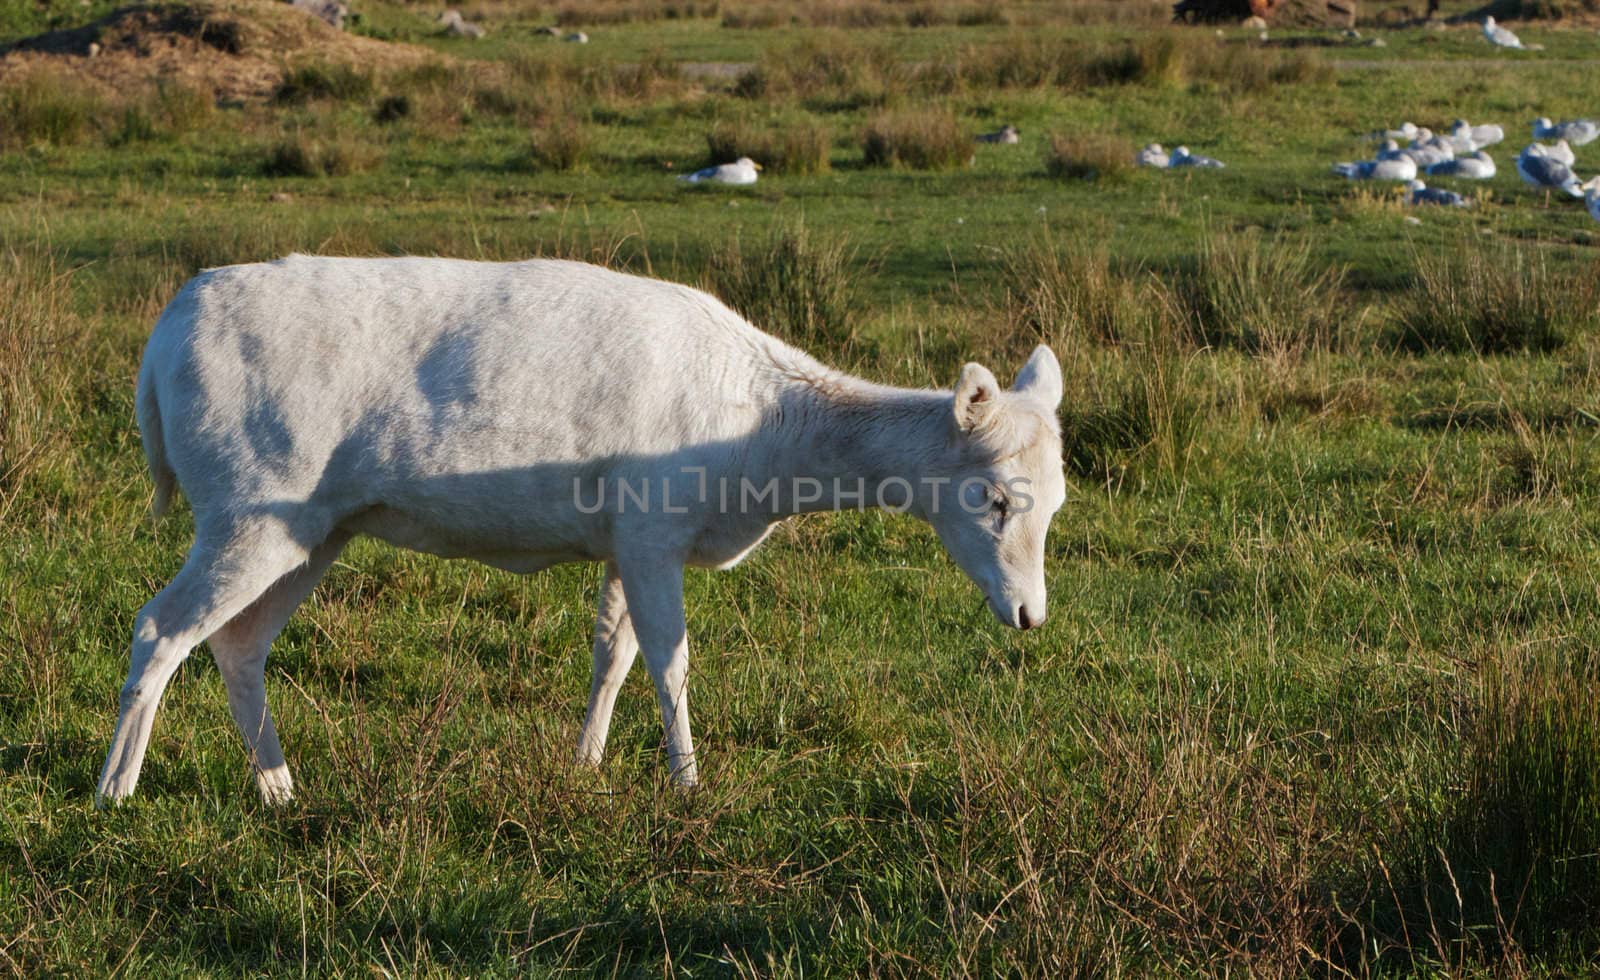 Young White Elk  in a grass field with sea gulls in background